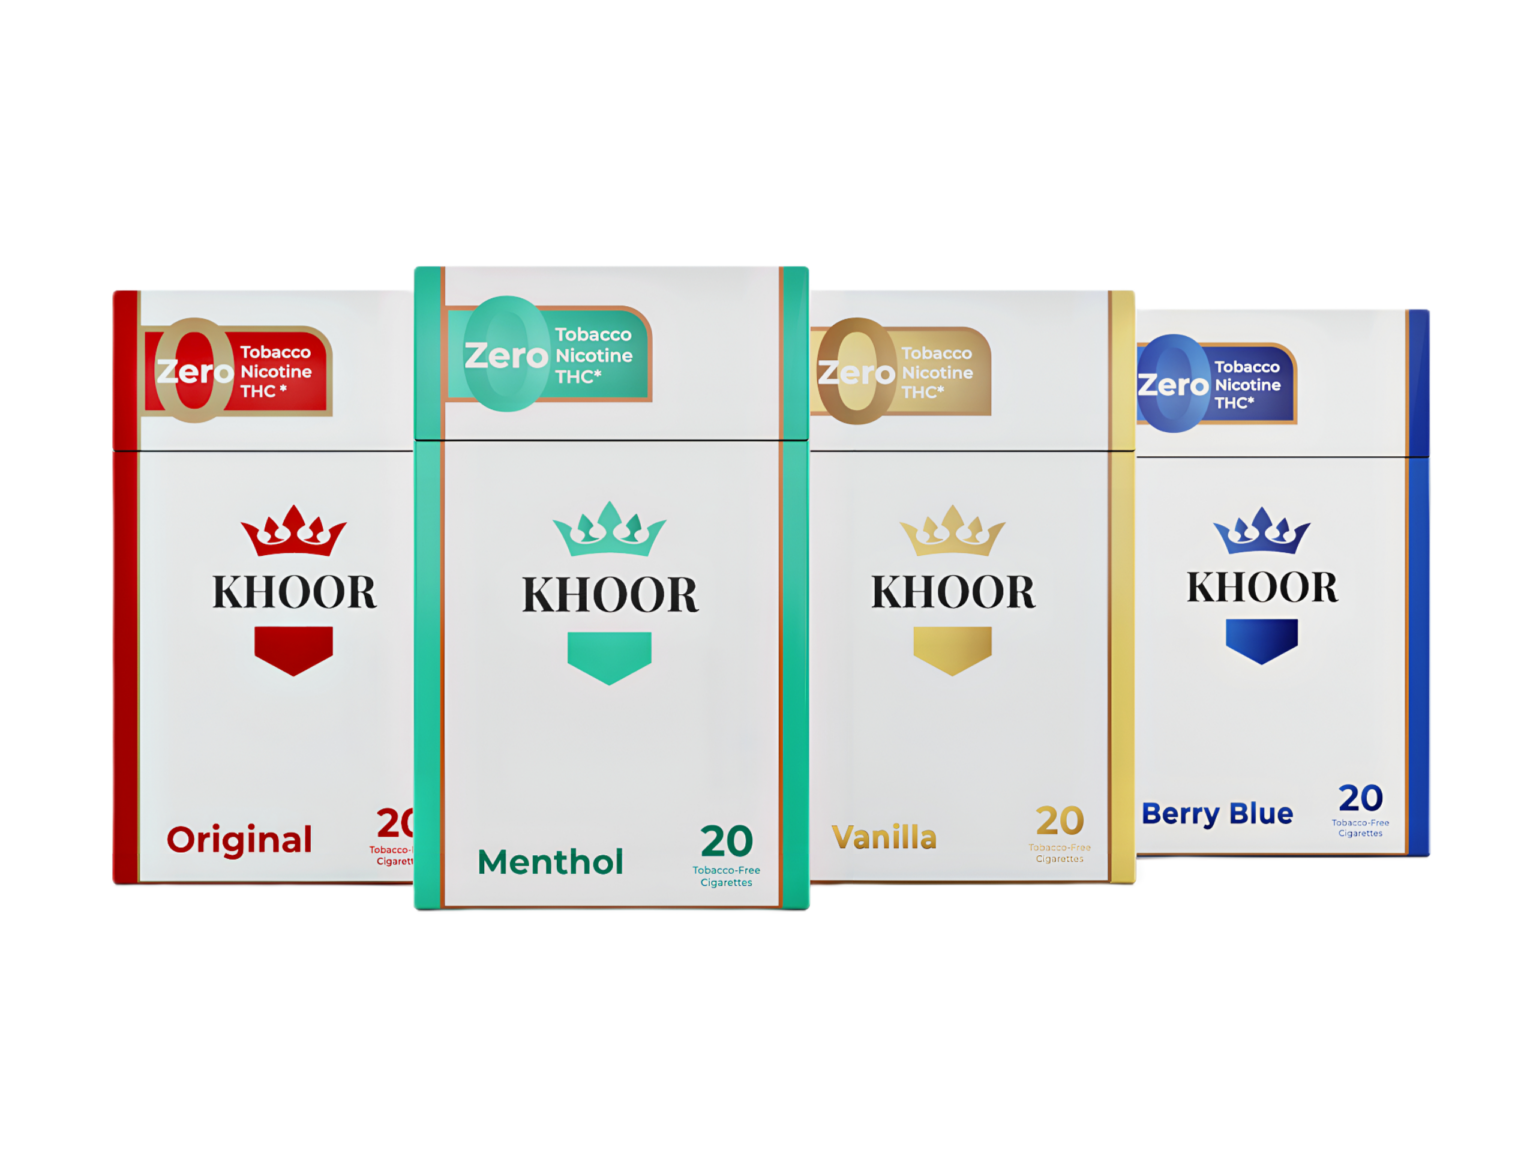 What Are Khoor Cigarettes? NicotineFree Cigarettes KHOOR™